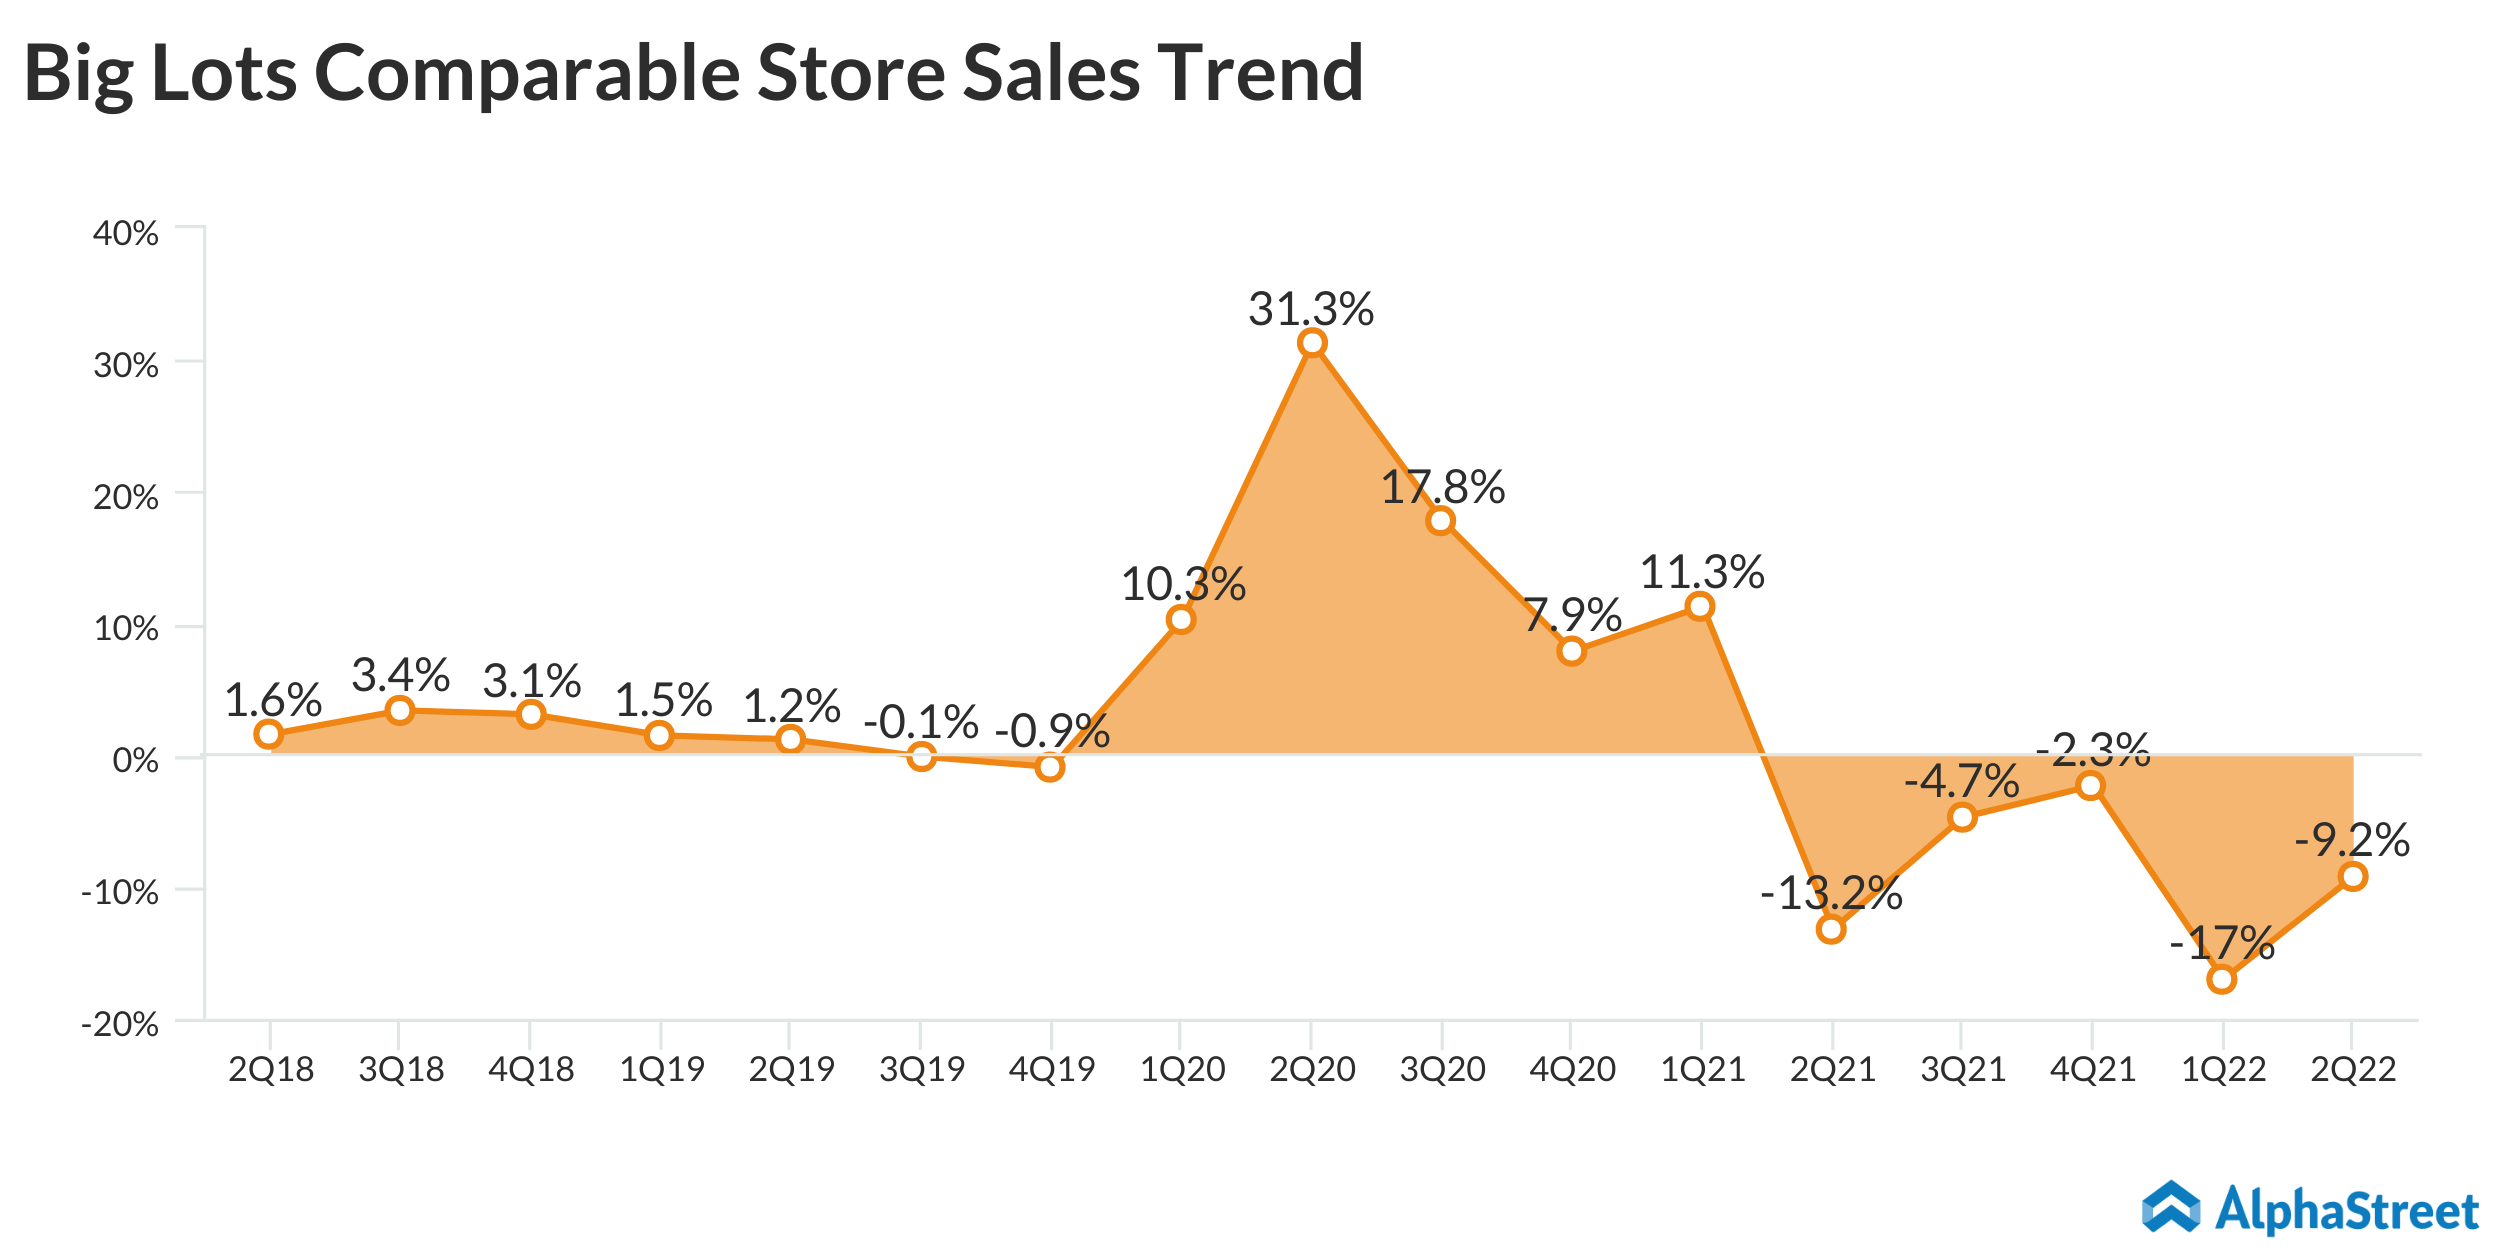 Big Lots Comparable Store Sales Trend